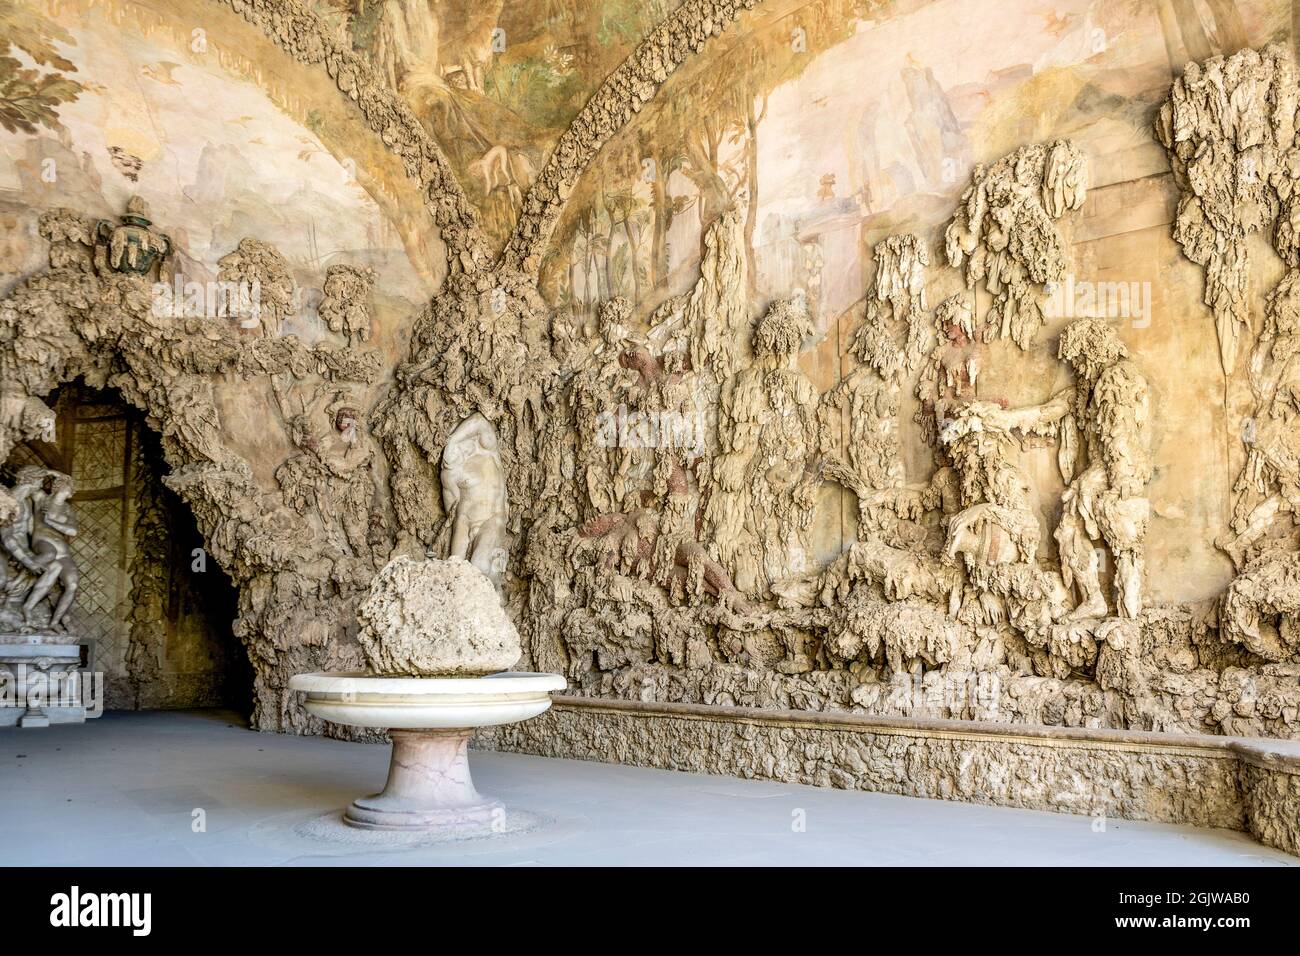 Sculptures in the the Buontalenti Grotto, built in the 15th century in Mannerist style, Boboli Gardens, beside Pitti Palace, Florence, Tuscany, Italy Stock Photo